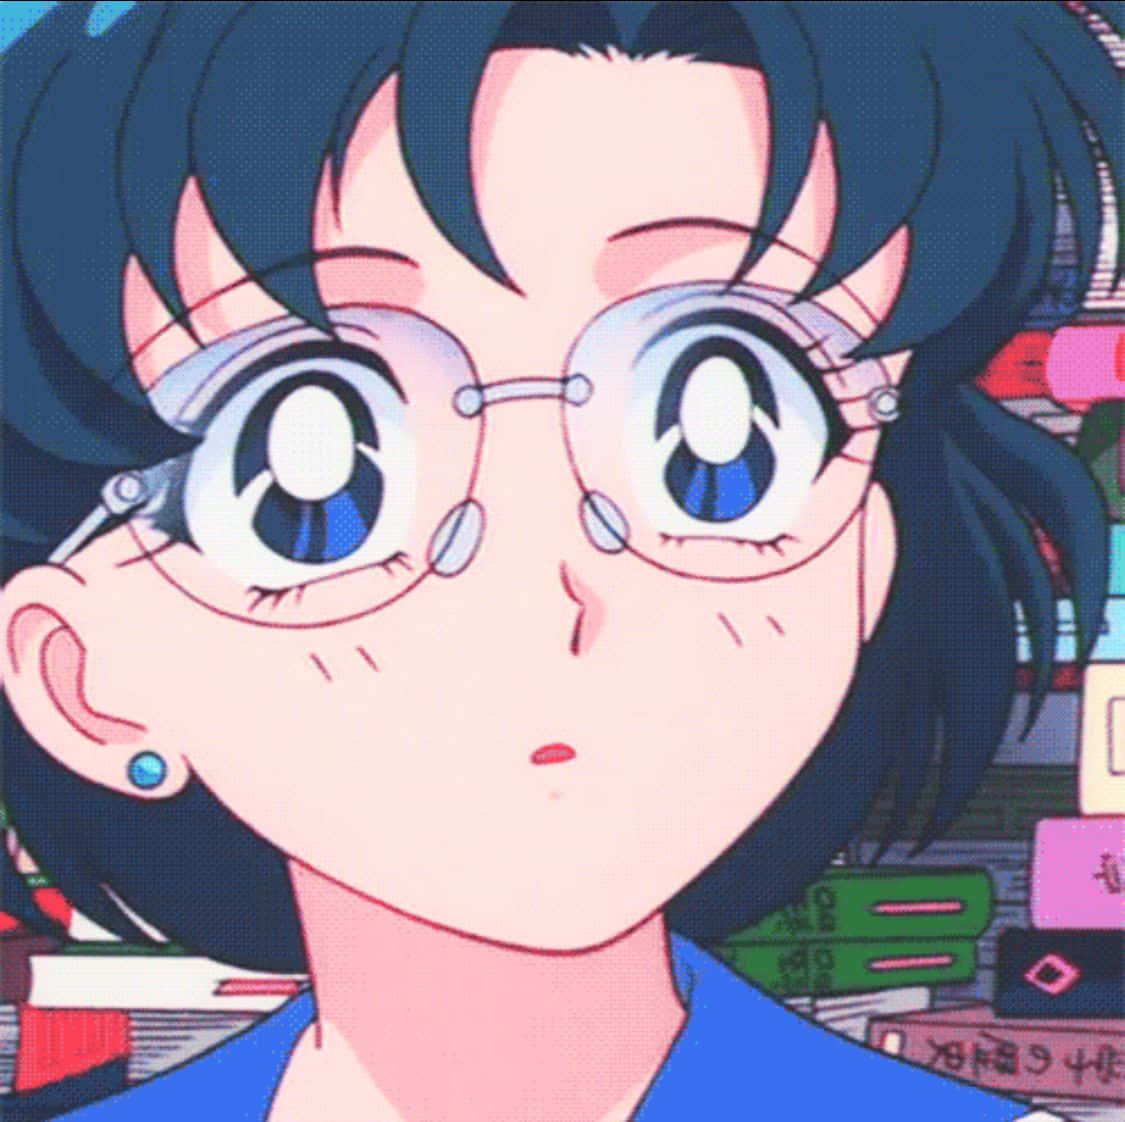 A Girl With Glasses In Front Of A Book Shelf Wallpaper